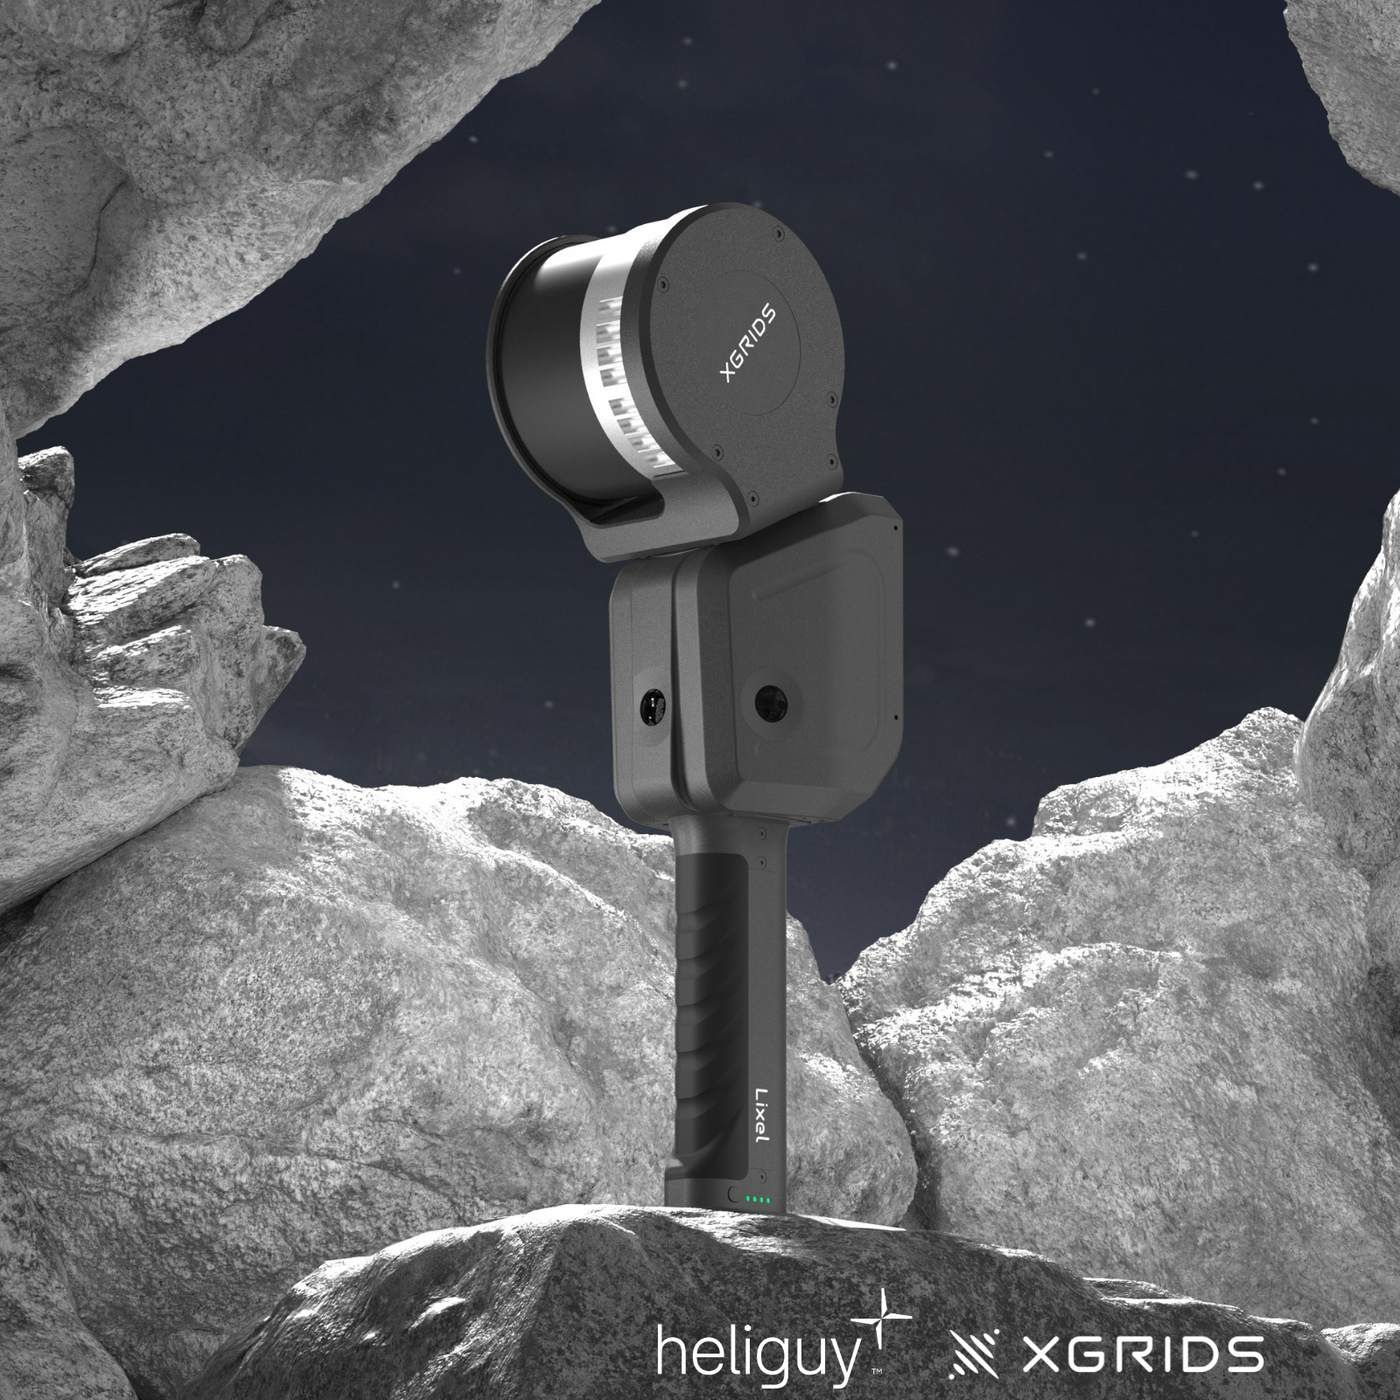 Heliguy Partners With XGRIDS For Next-gen 3D Model Content Creation